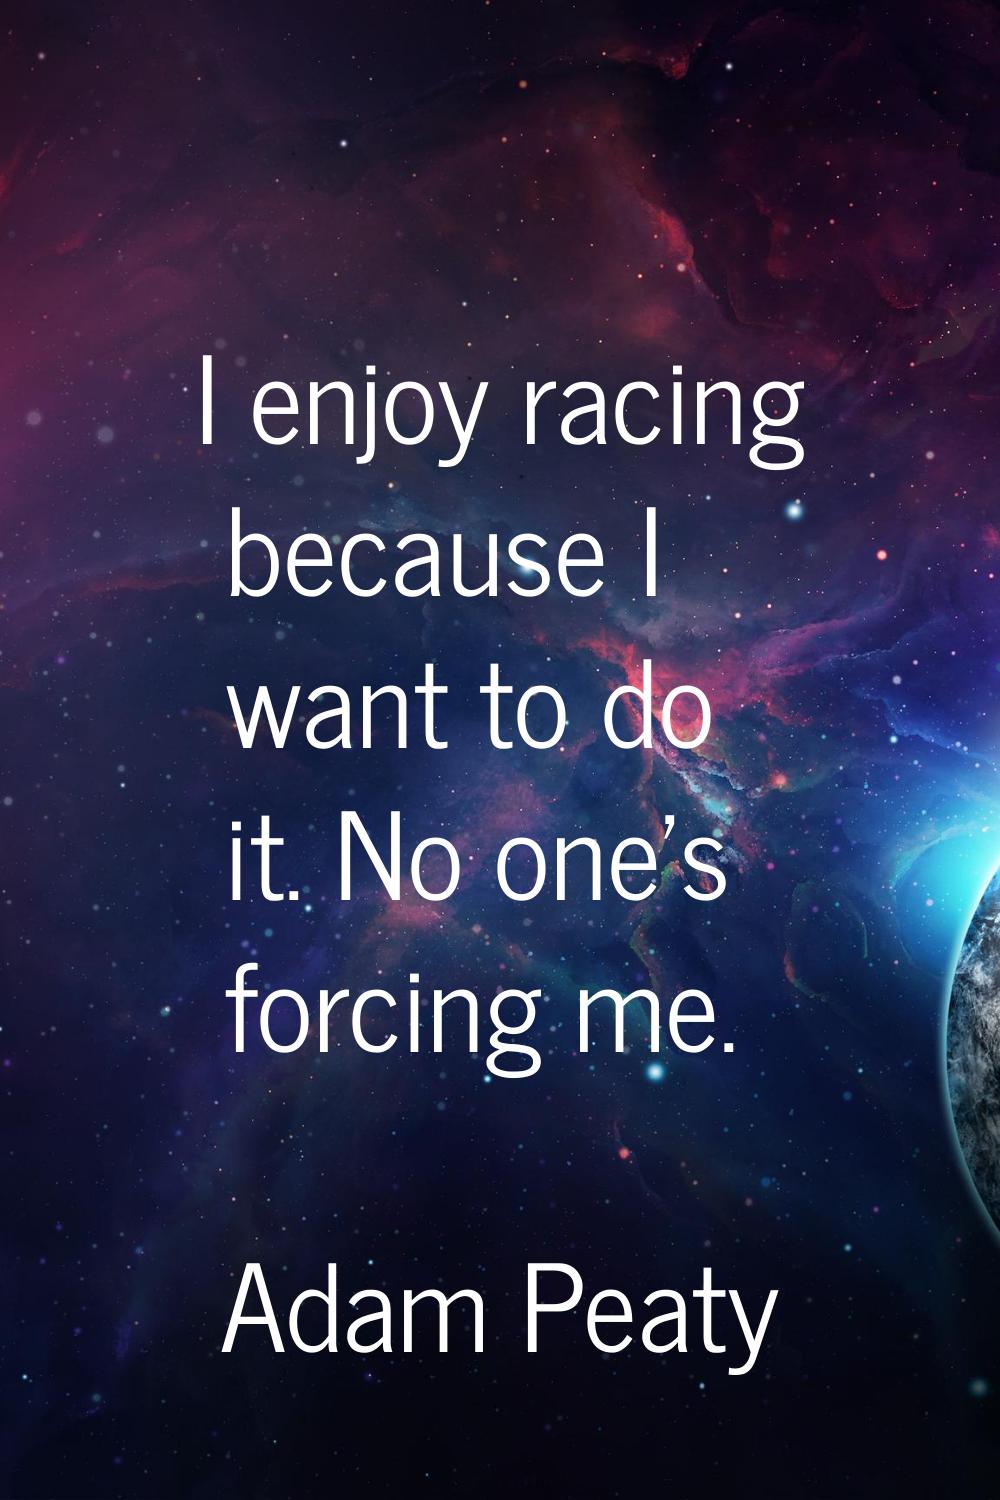 I enjoy racing because I want to do it. No one's forcing me.